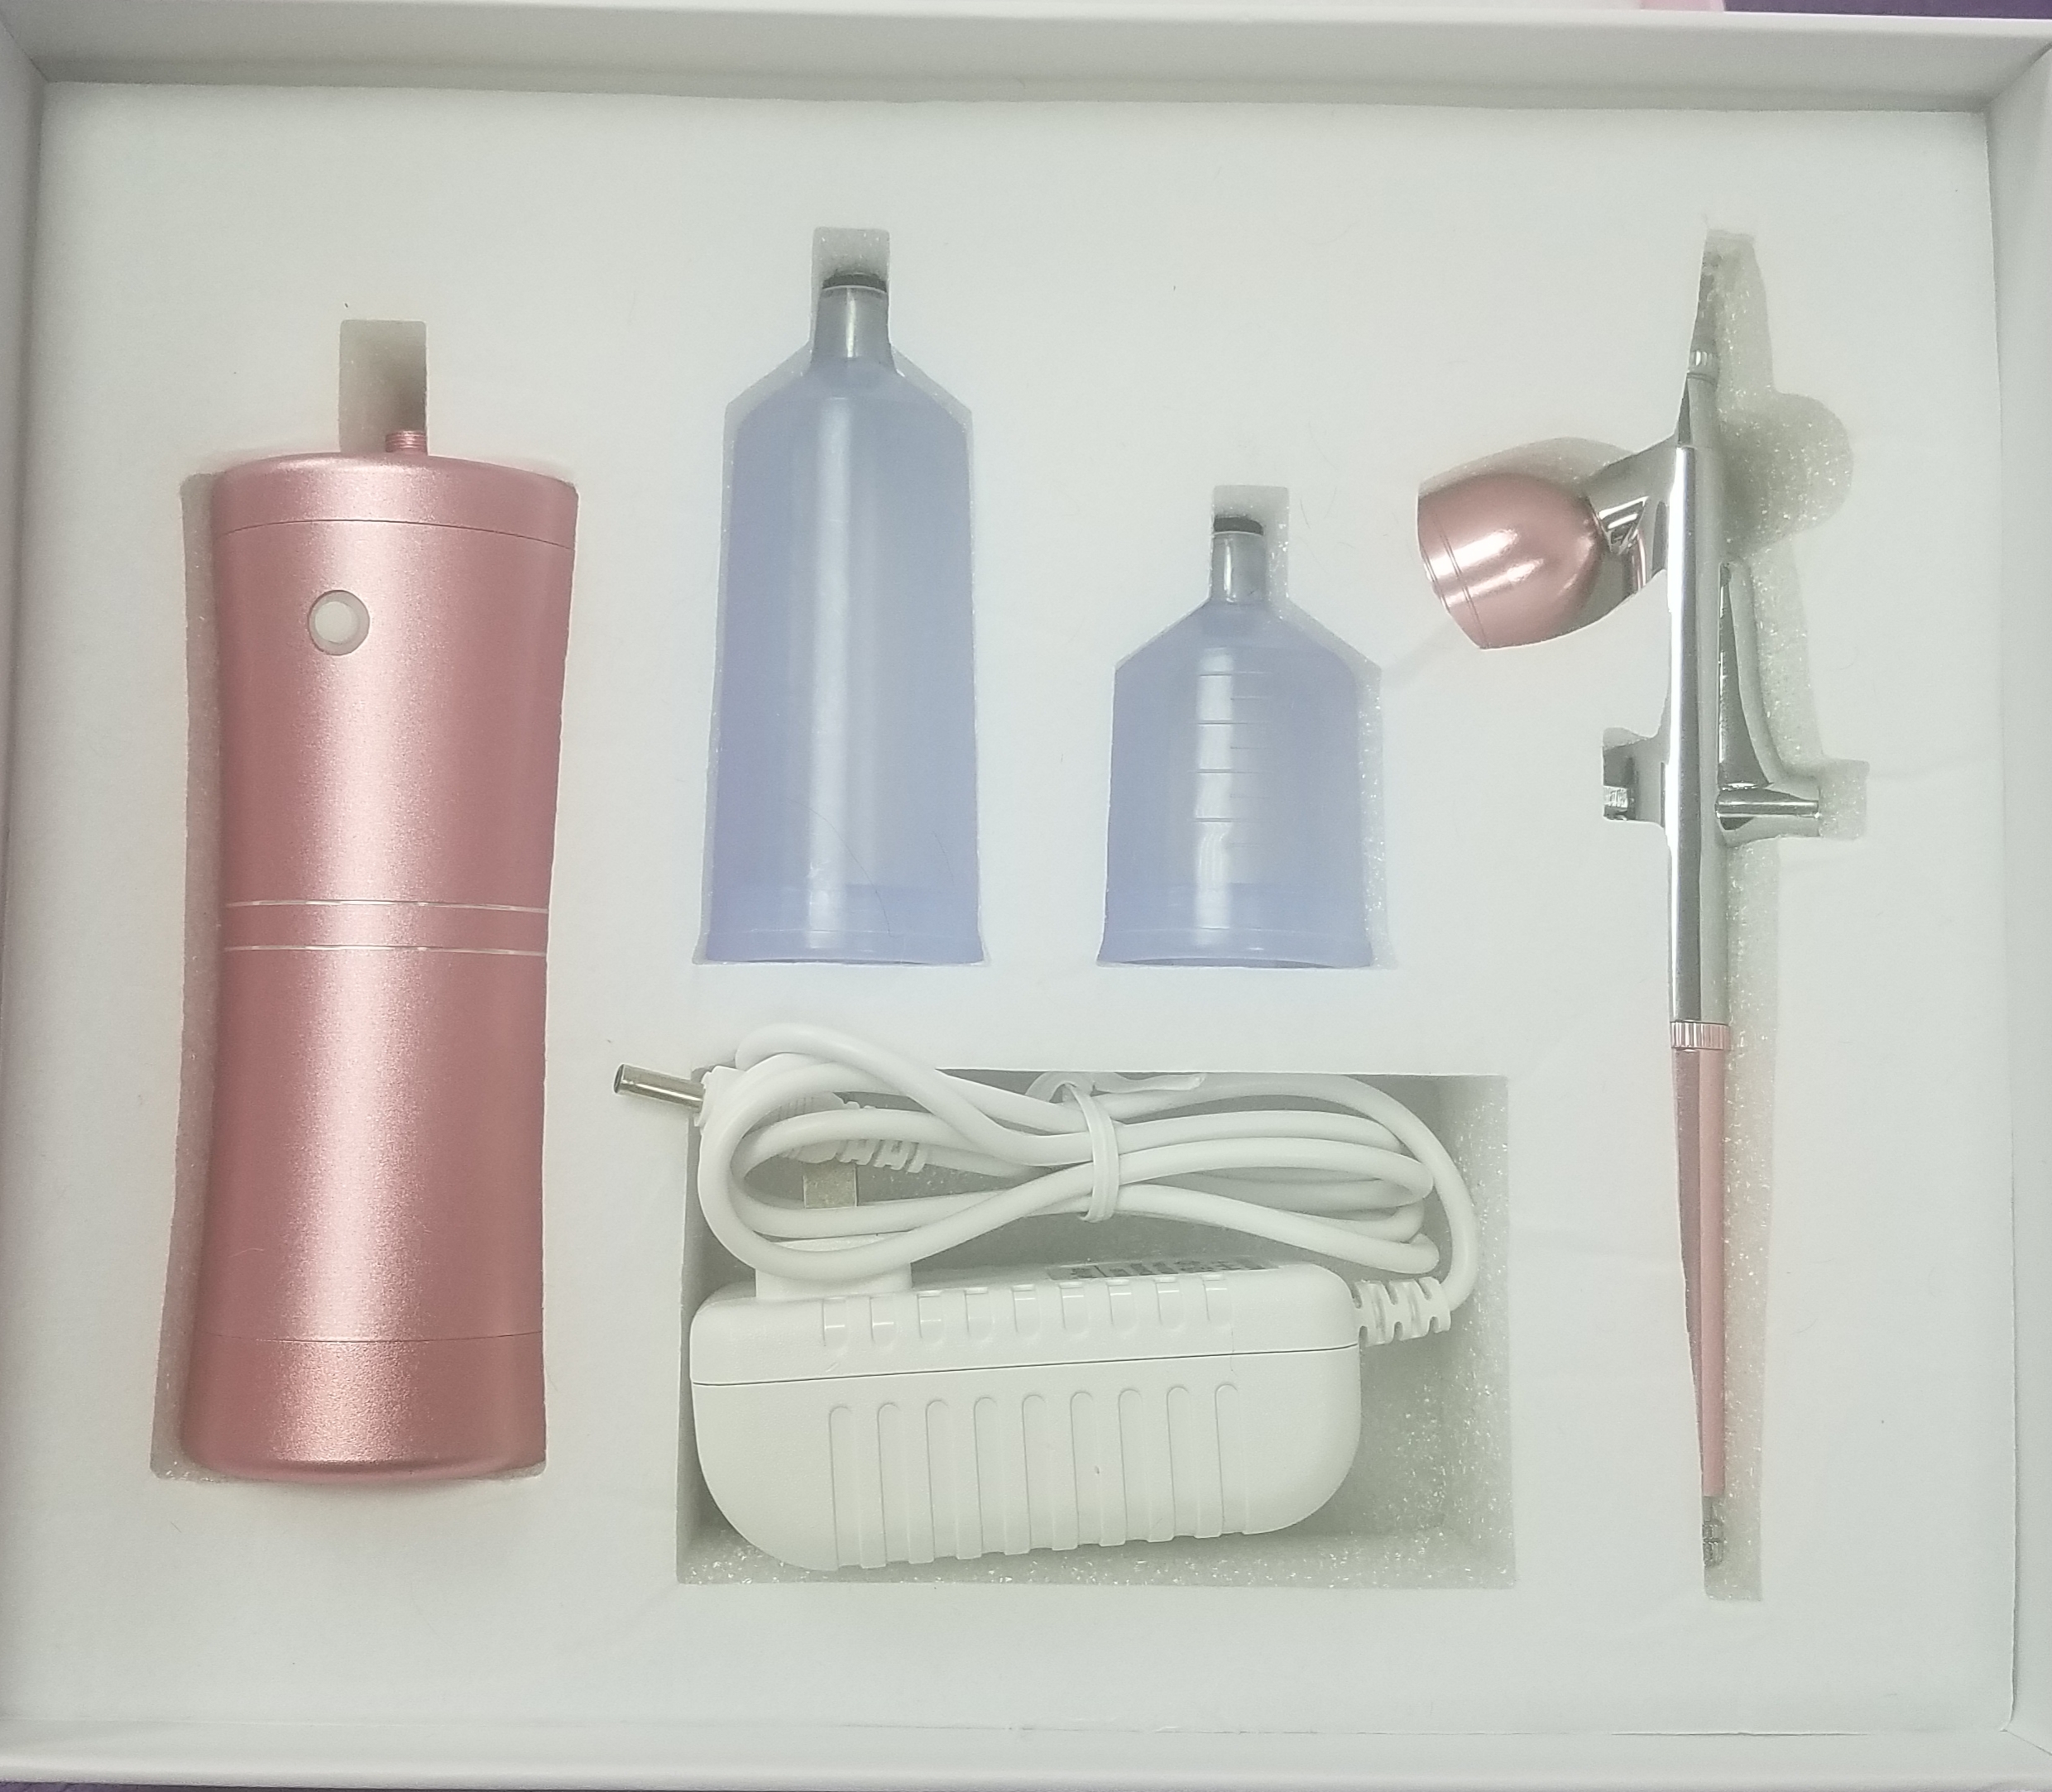 Queen of ColorCordless Airbrush Kit Pink - Queen of Color